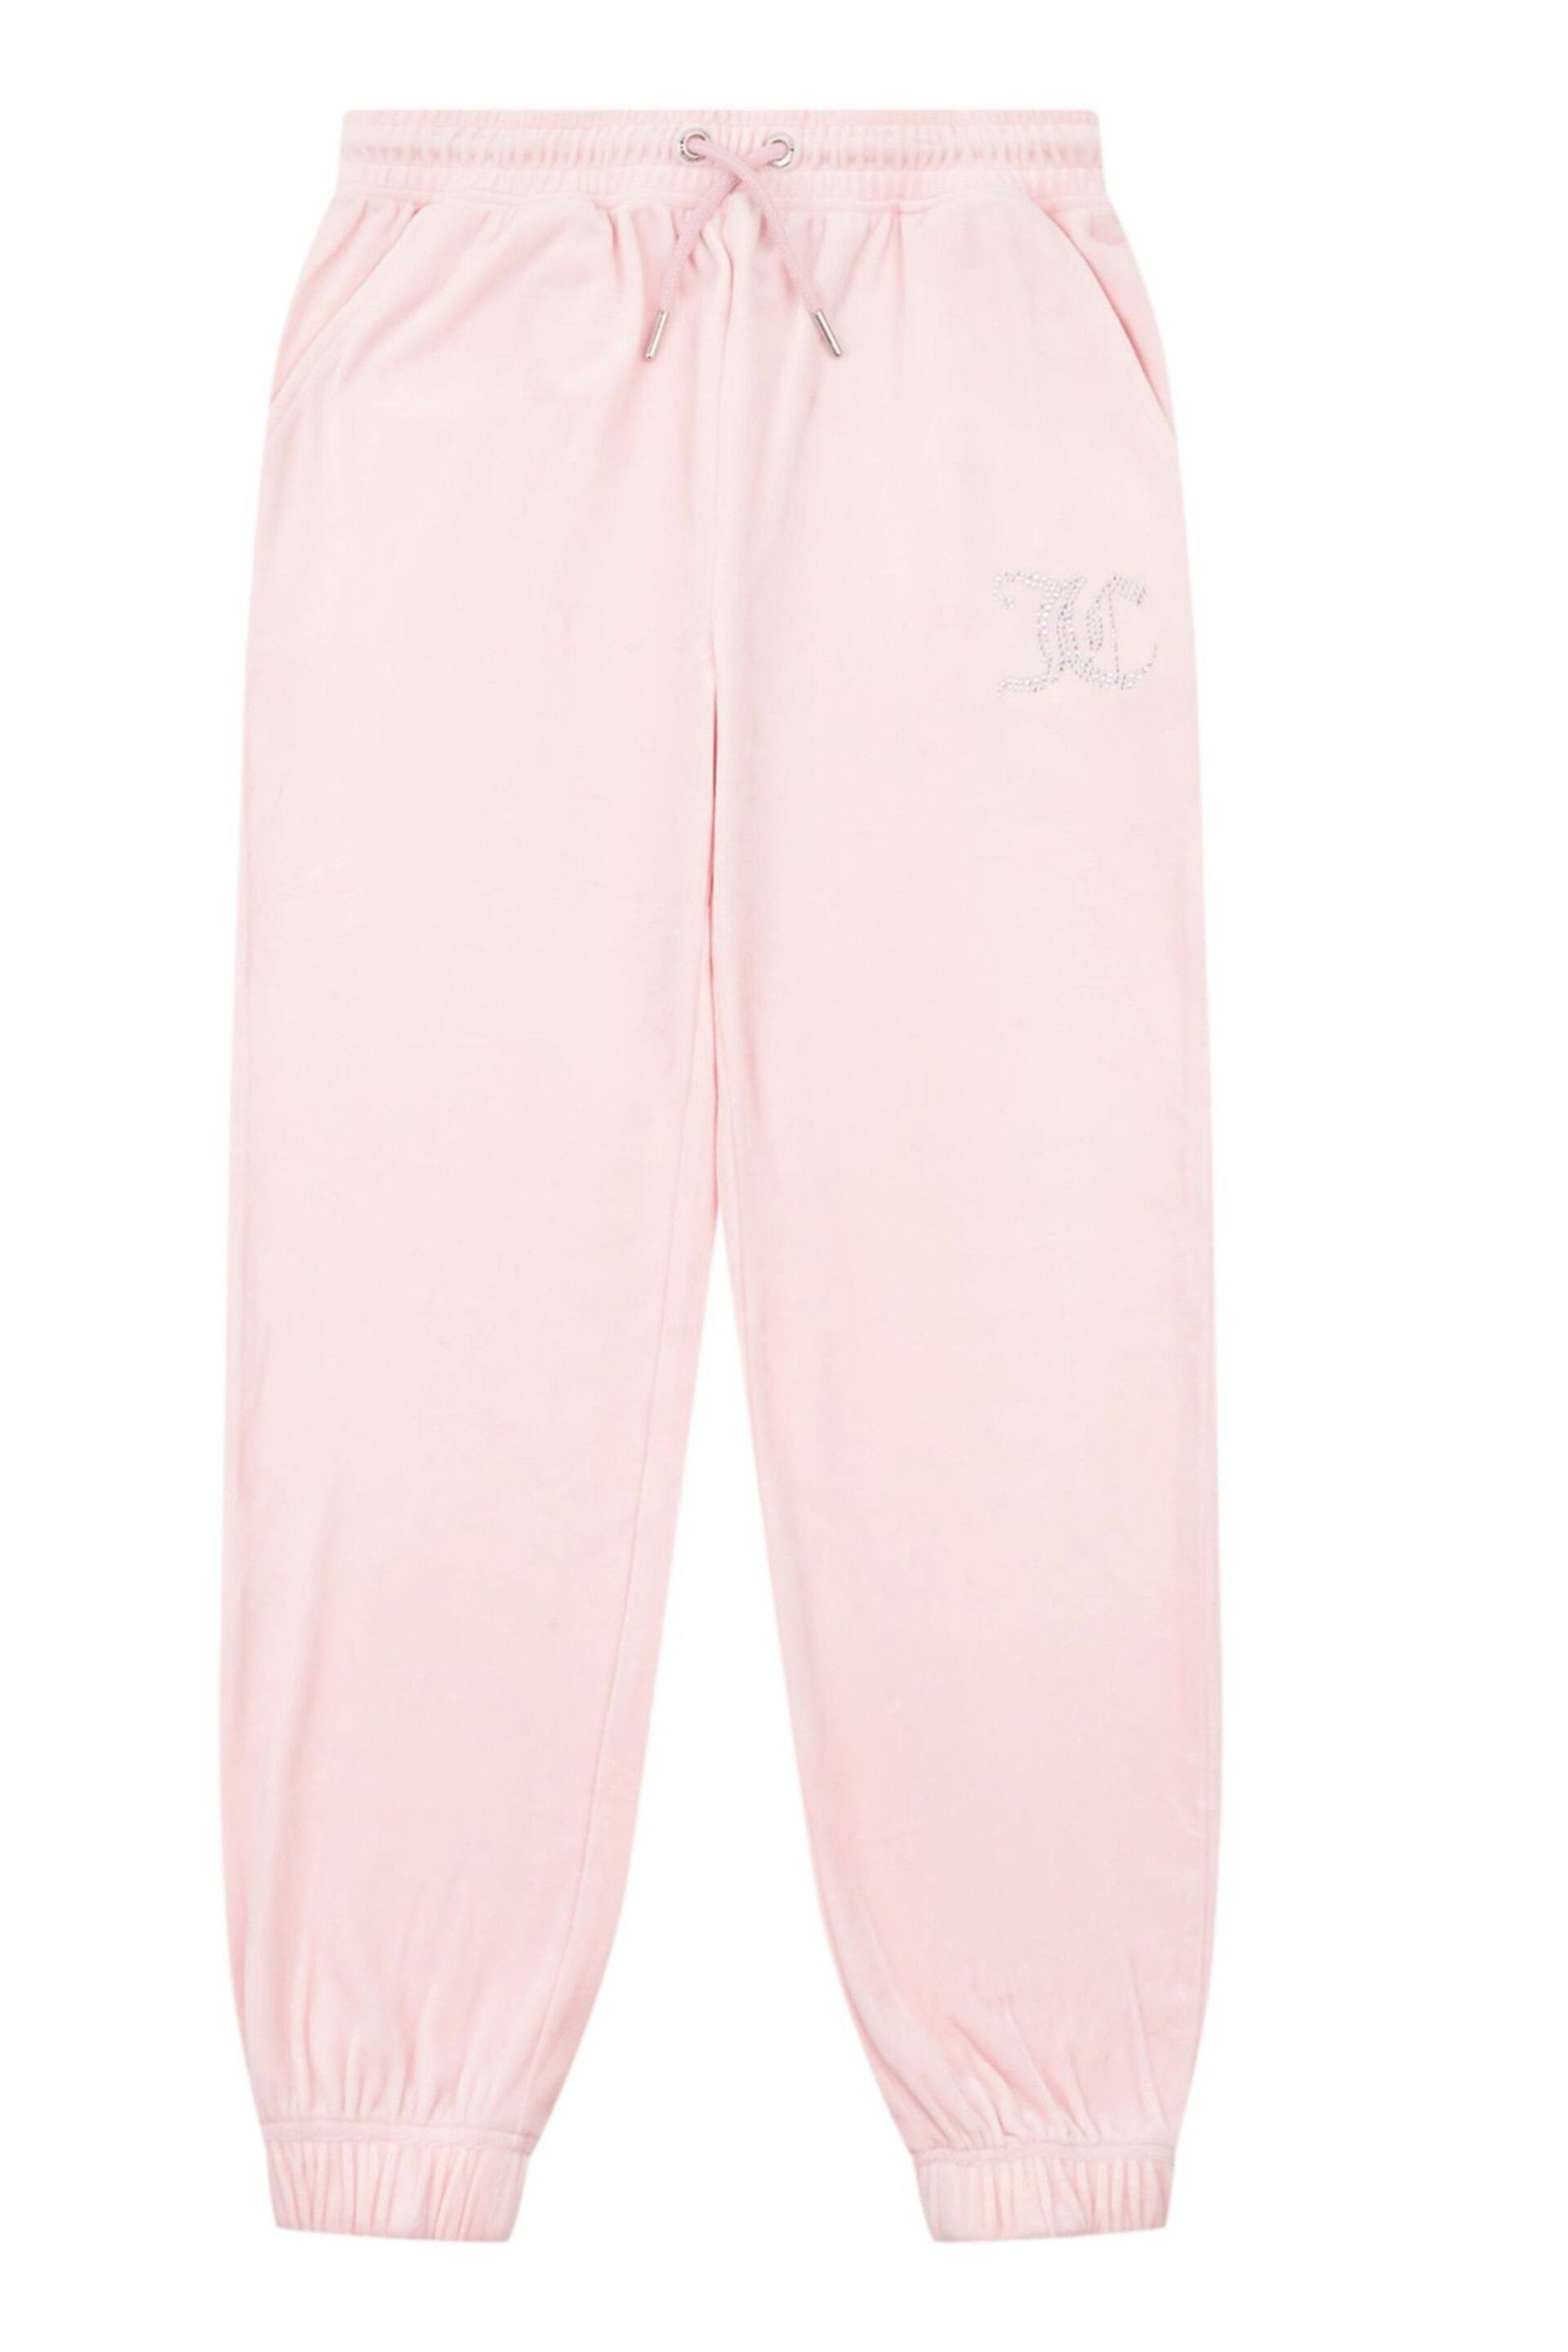 Juicy Couture Girls Pink Velour Joggers - Image 1 of 3